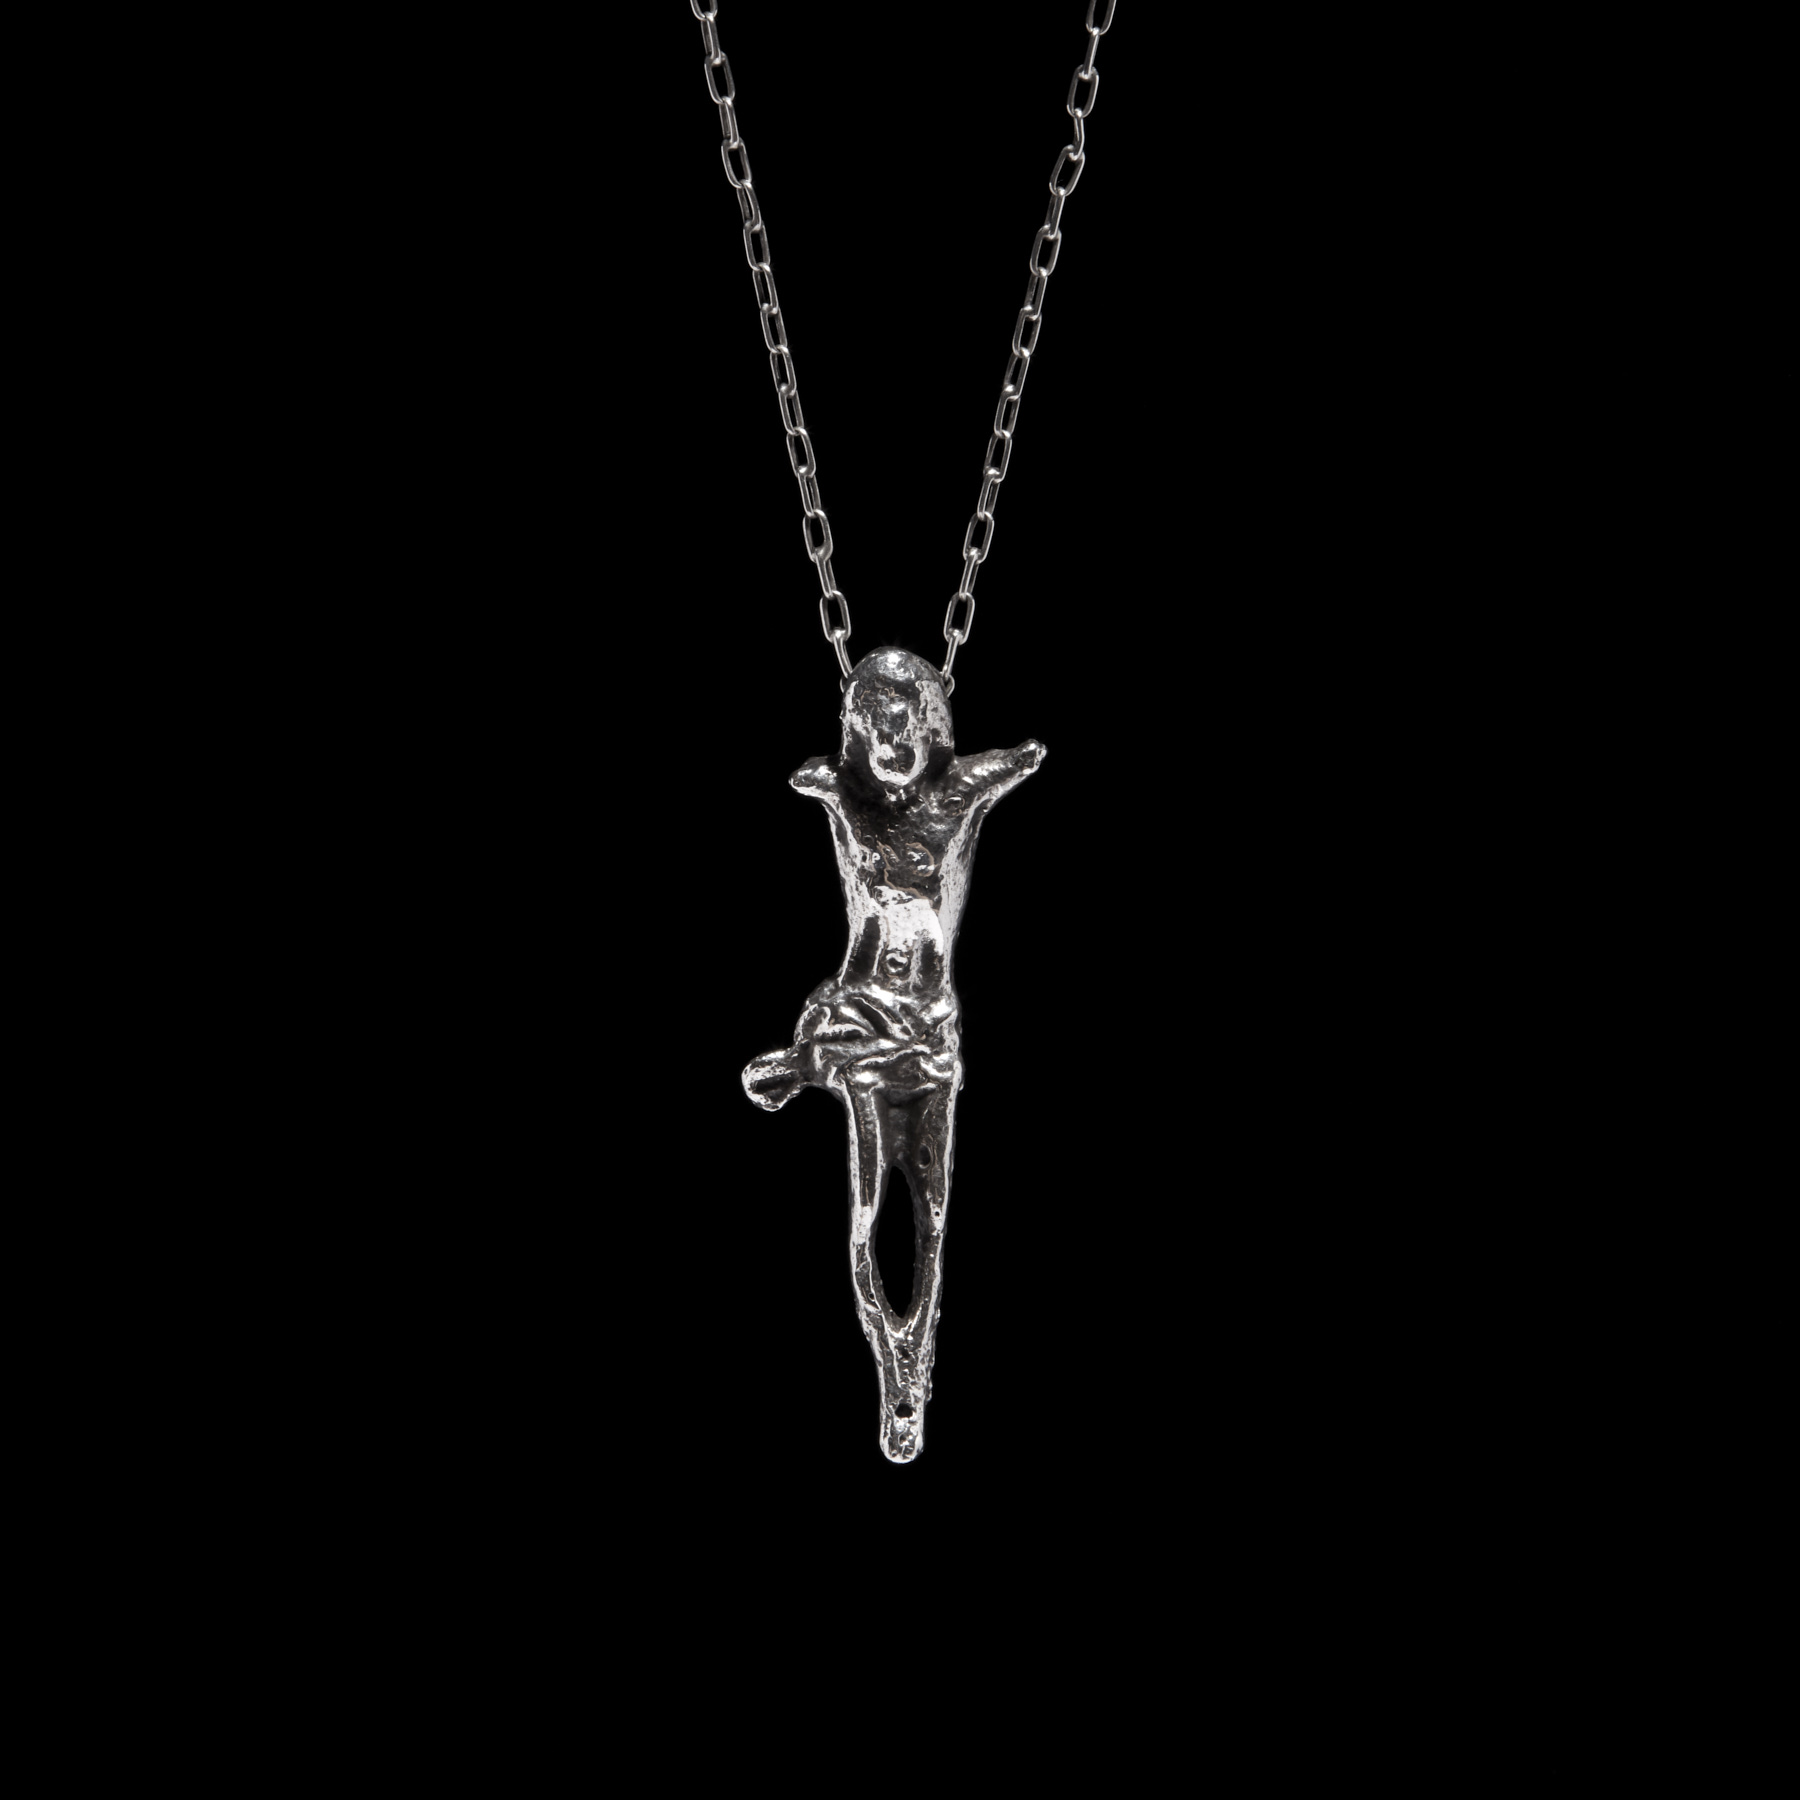 Silver Jesus Necklace N1 Silver Metal Collection Black Background